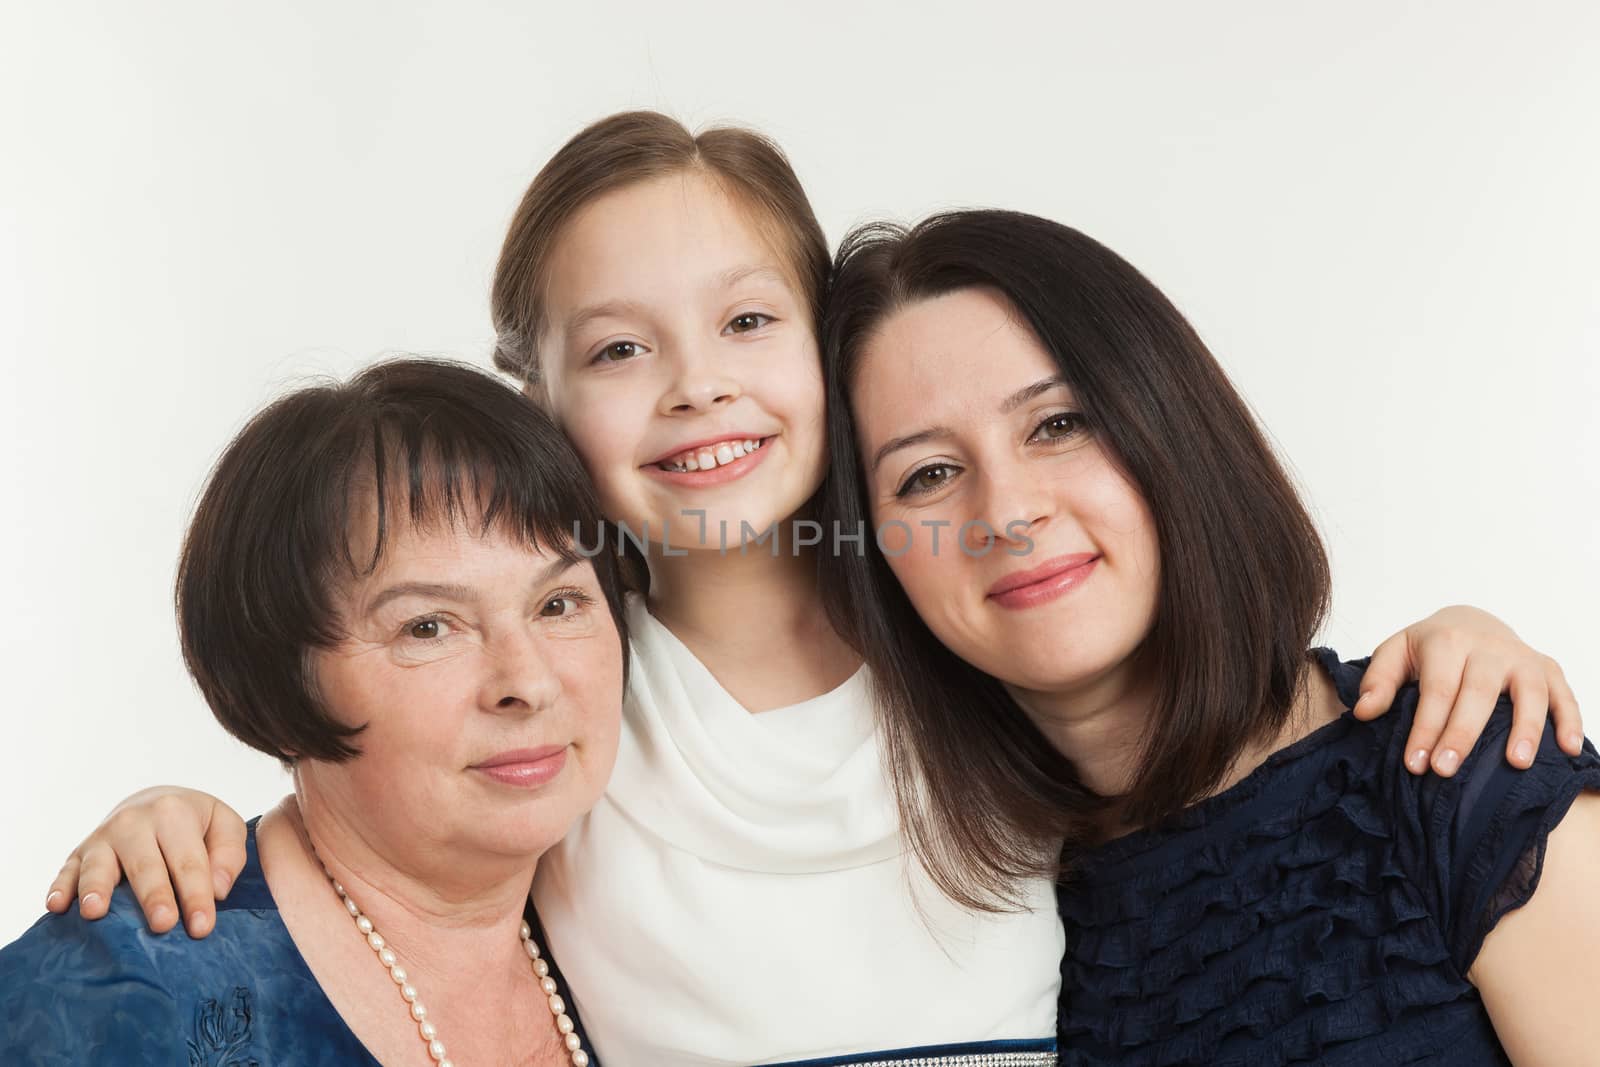 The granddaughter embraces the grandmother and mother  by sveter